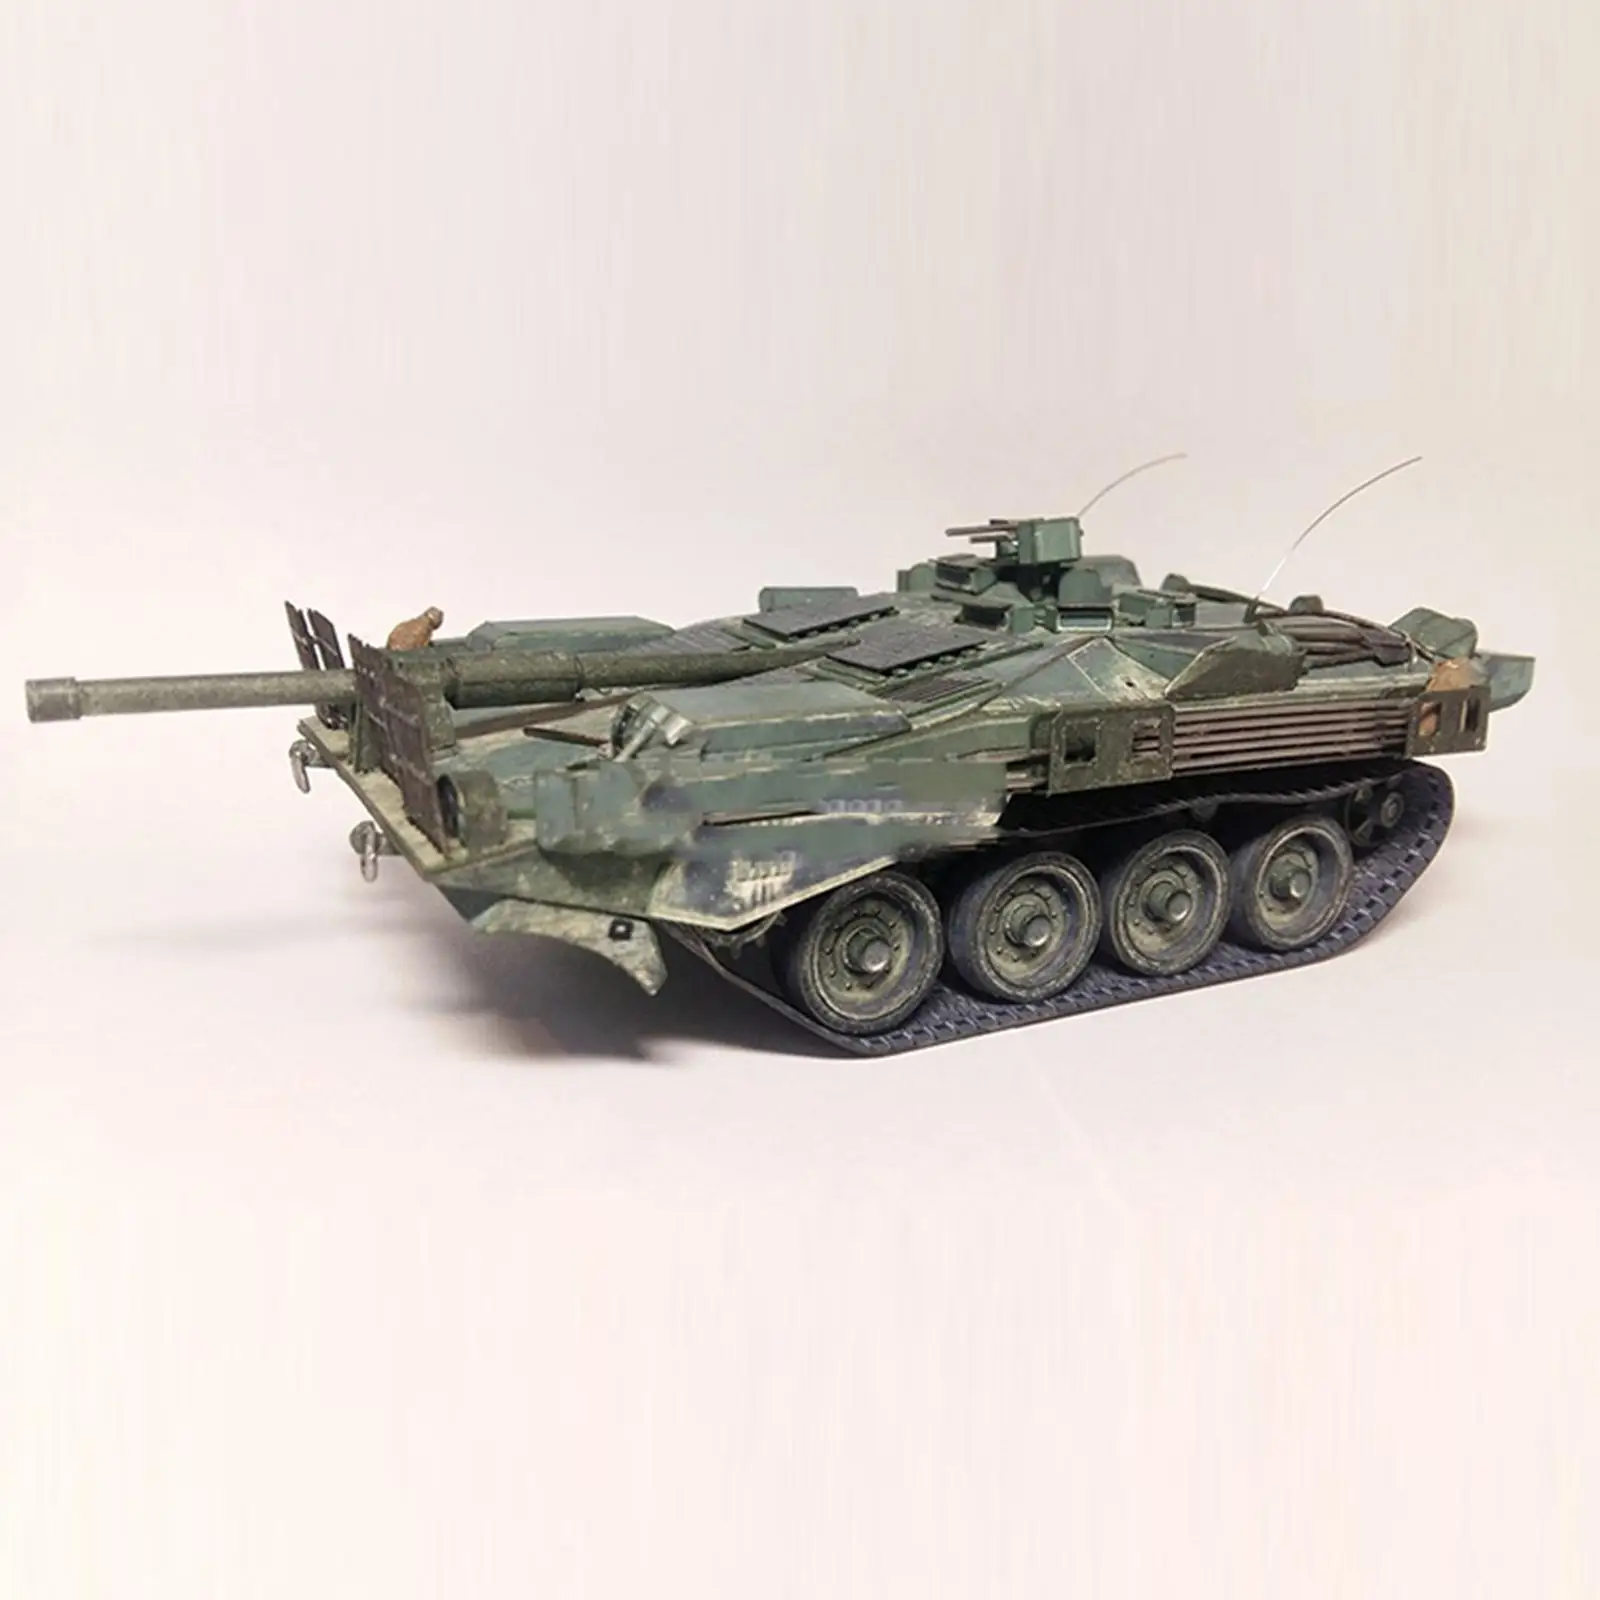 1/35 Tank Model Decor DIY Assemble Toy Paper Model for Gifts Children Adults